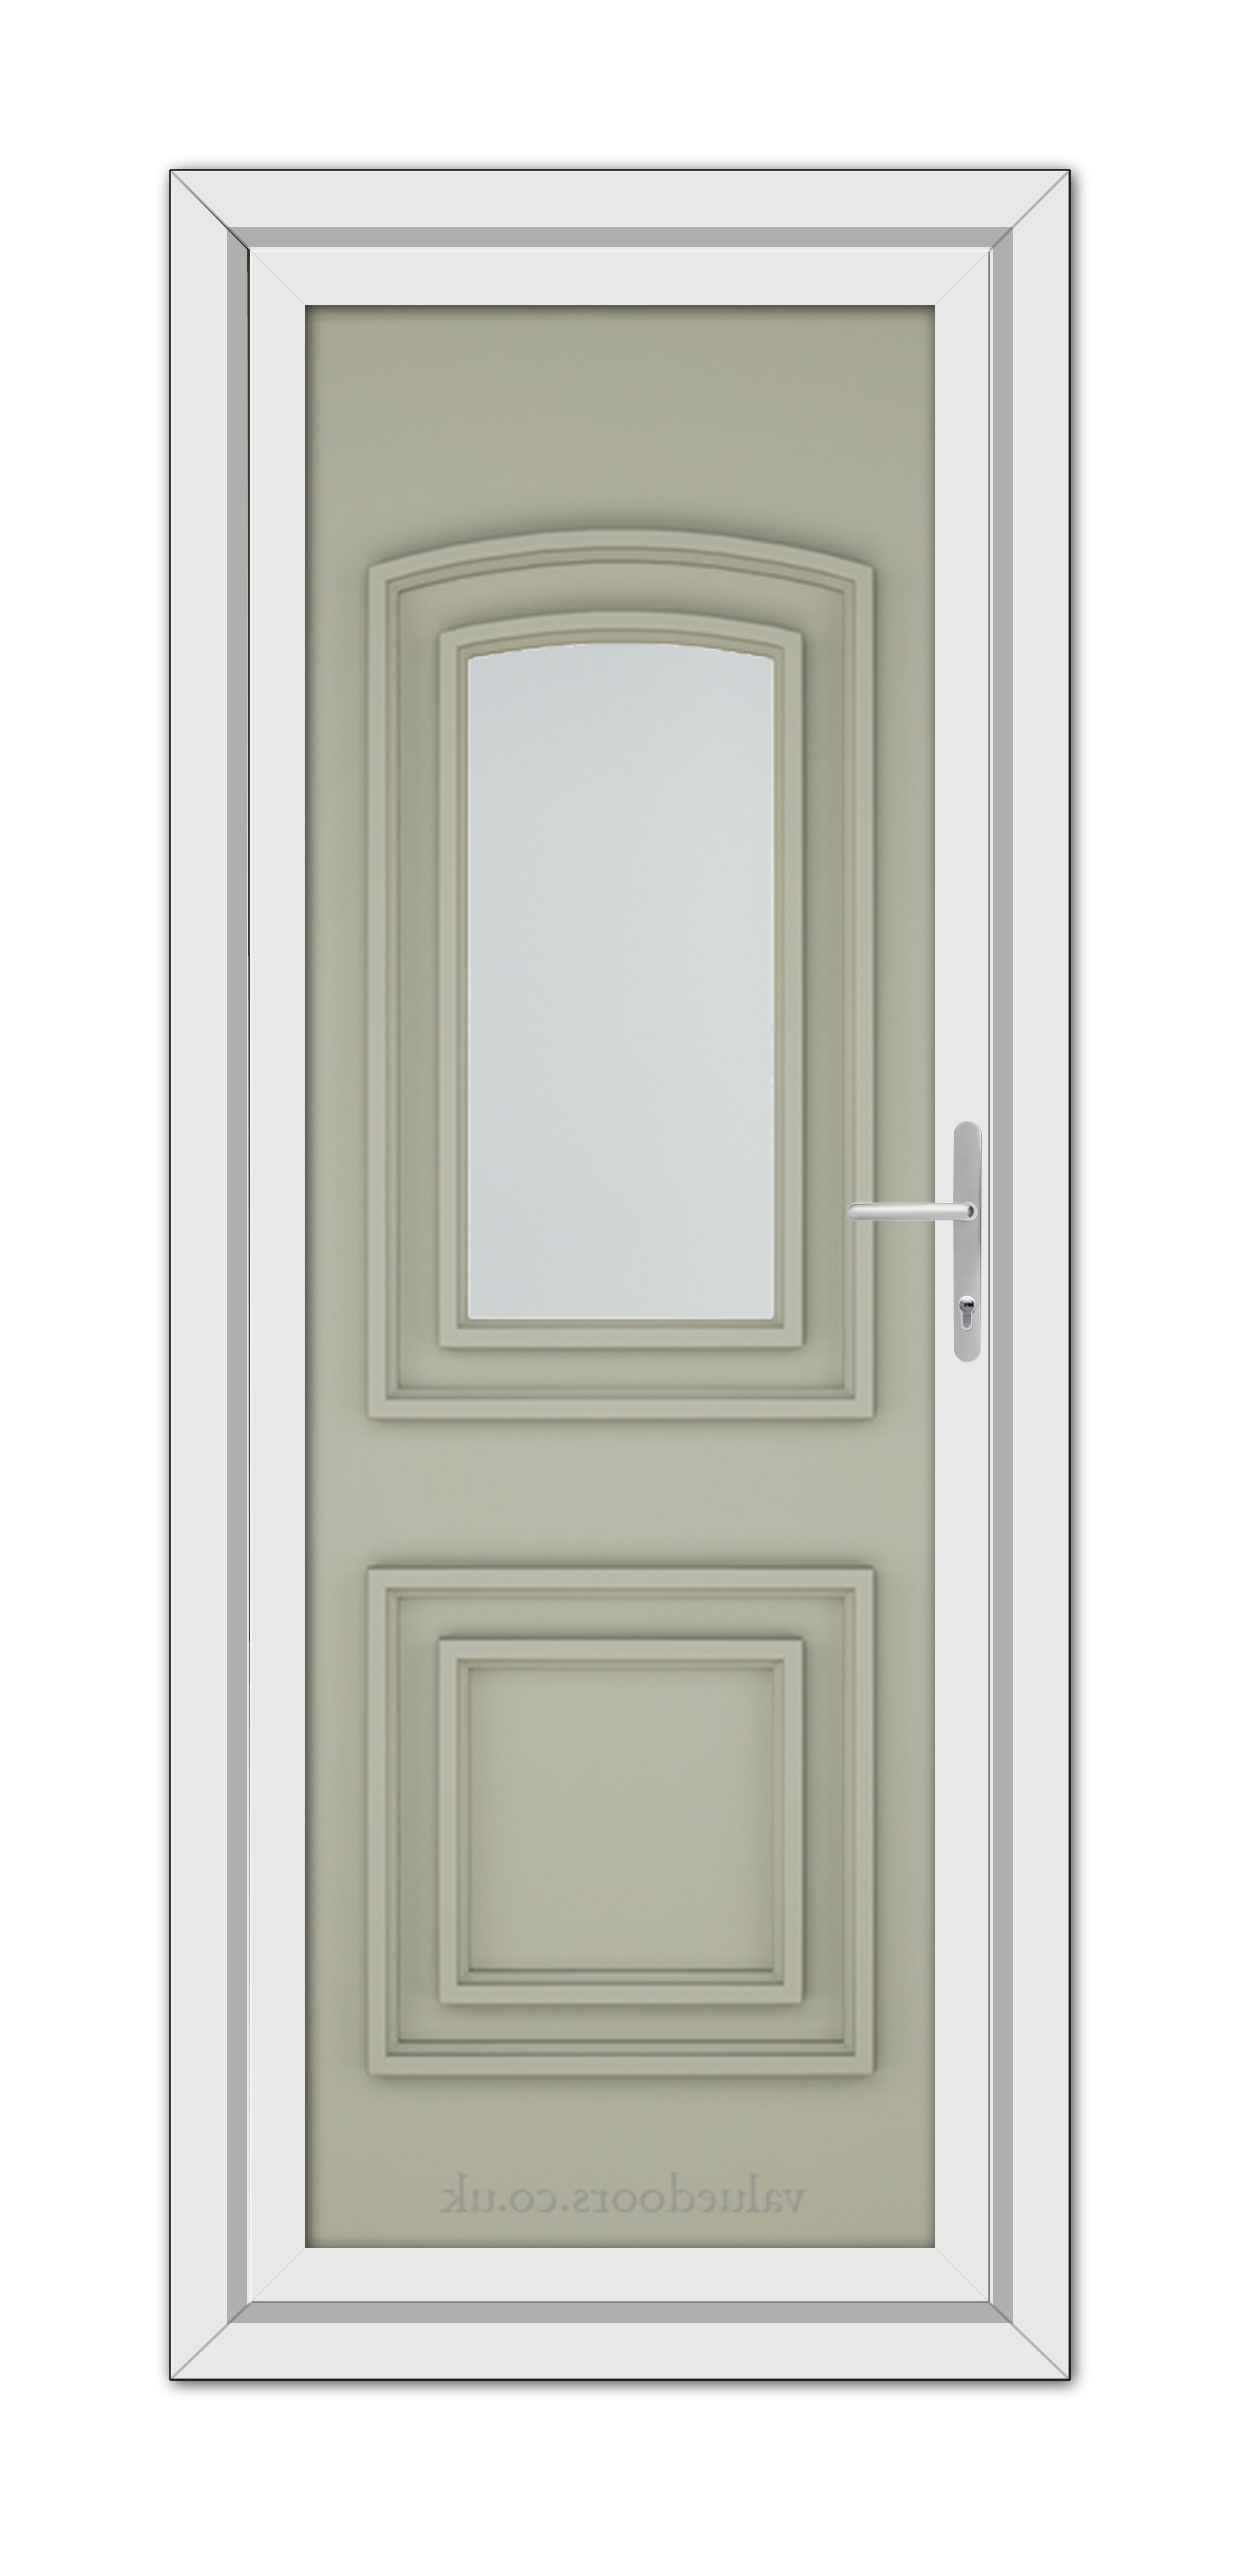 A Agate Grey Balmoral One uPVC Door with a rectangular central window, a metal handle on the right, and a surrounding white frame.